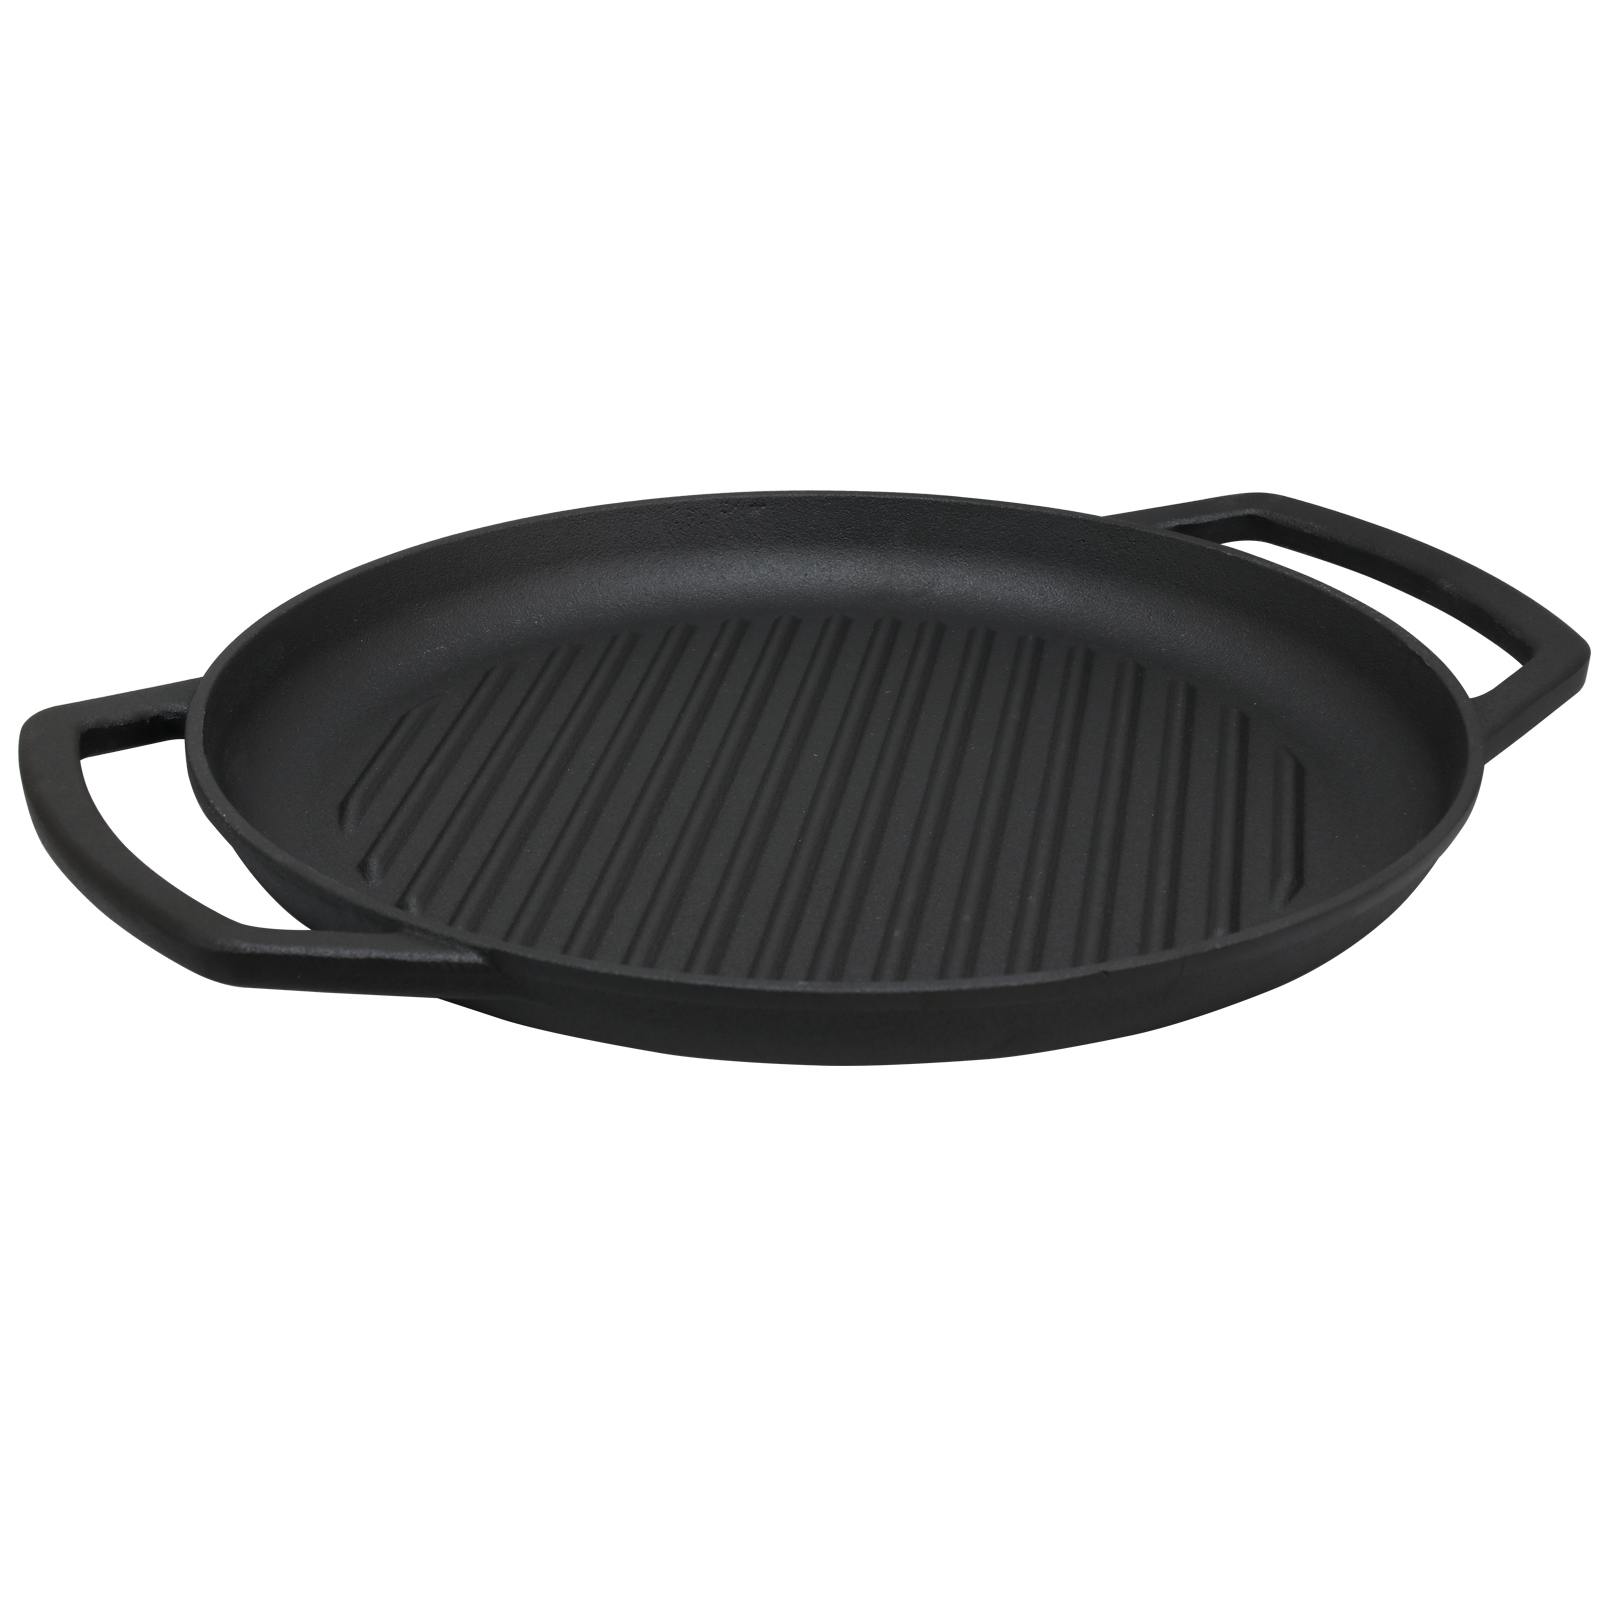 Weight Watchers Coley 13 inch Preseasoned Cast Iron Grill Pan